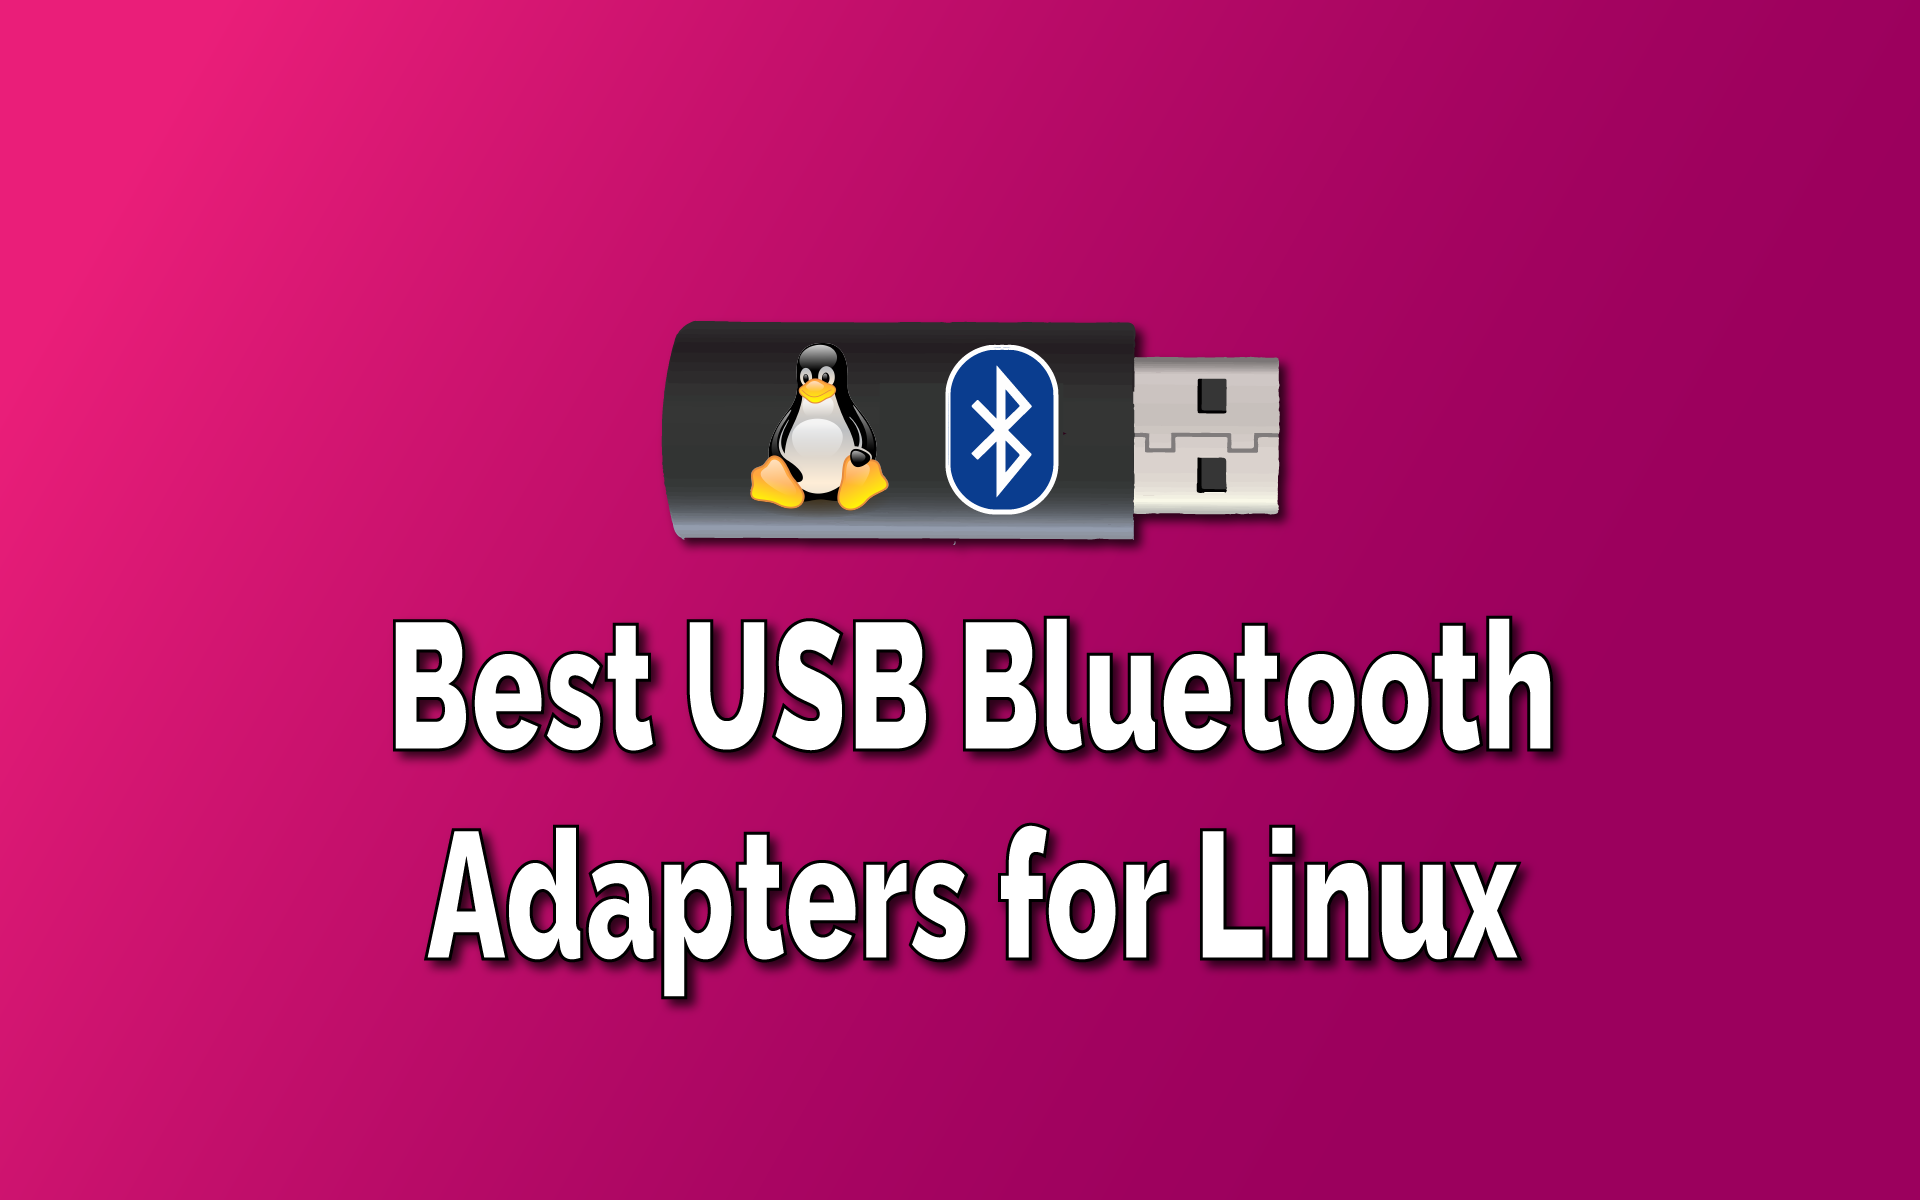 Linux and a Bluetooth Dongle